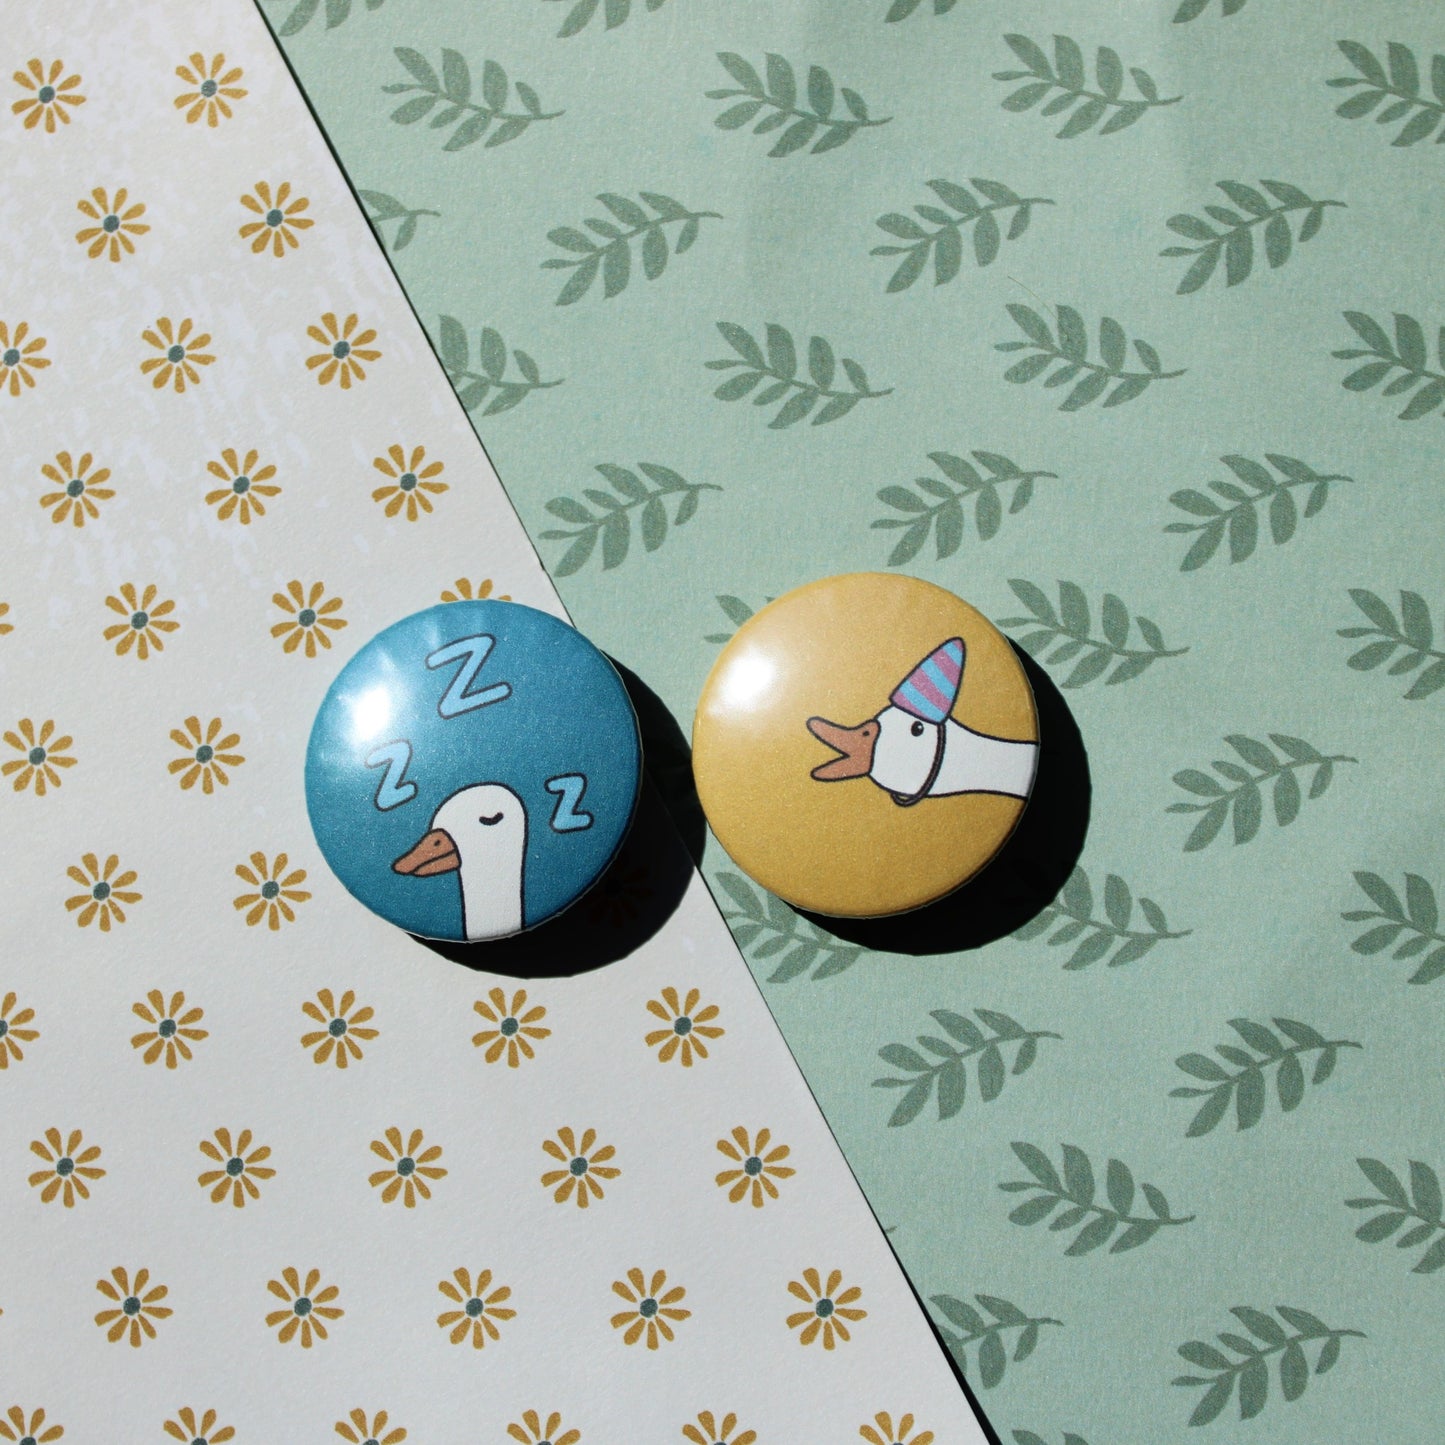 A floral and leaf background with one blue circle button with a white goose head sleeping and three Z's in light blue around it's head. Next to it is a yellow circle button with a white goose head honking with a purple and blue striped party hat.